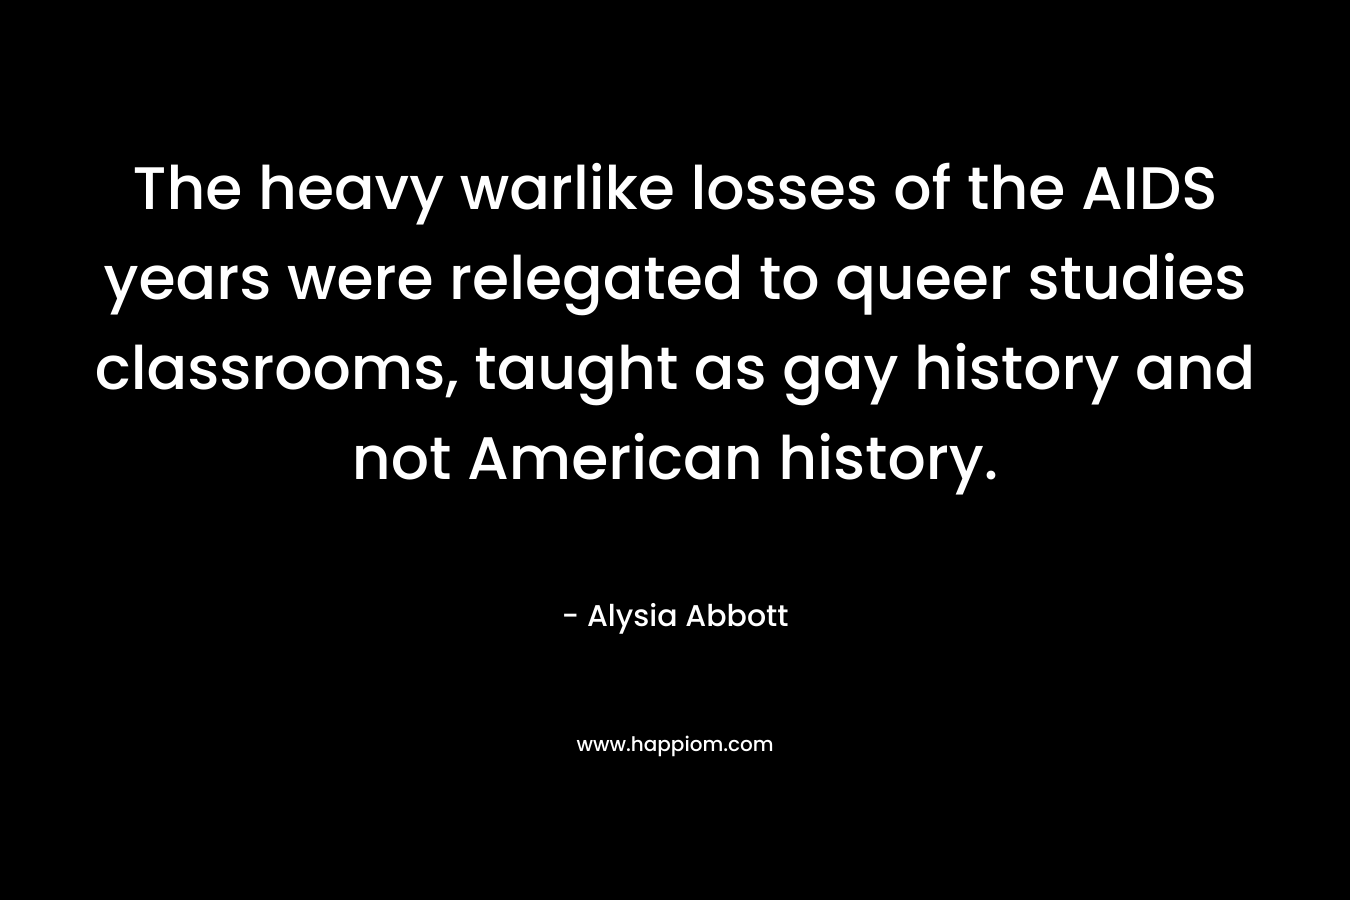 The heavy warlike losses of the AIDS years were relegated to queer studies classrooms, taught as gay history and not American history.